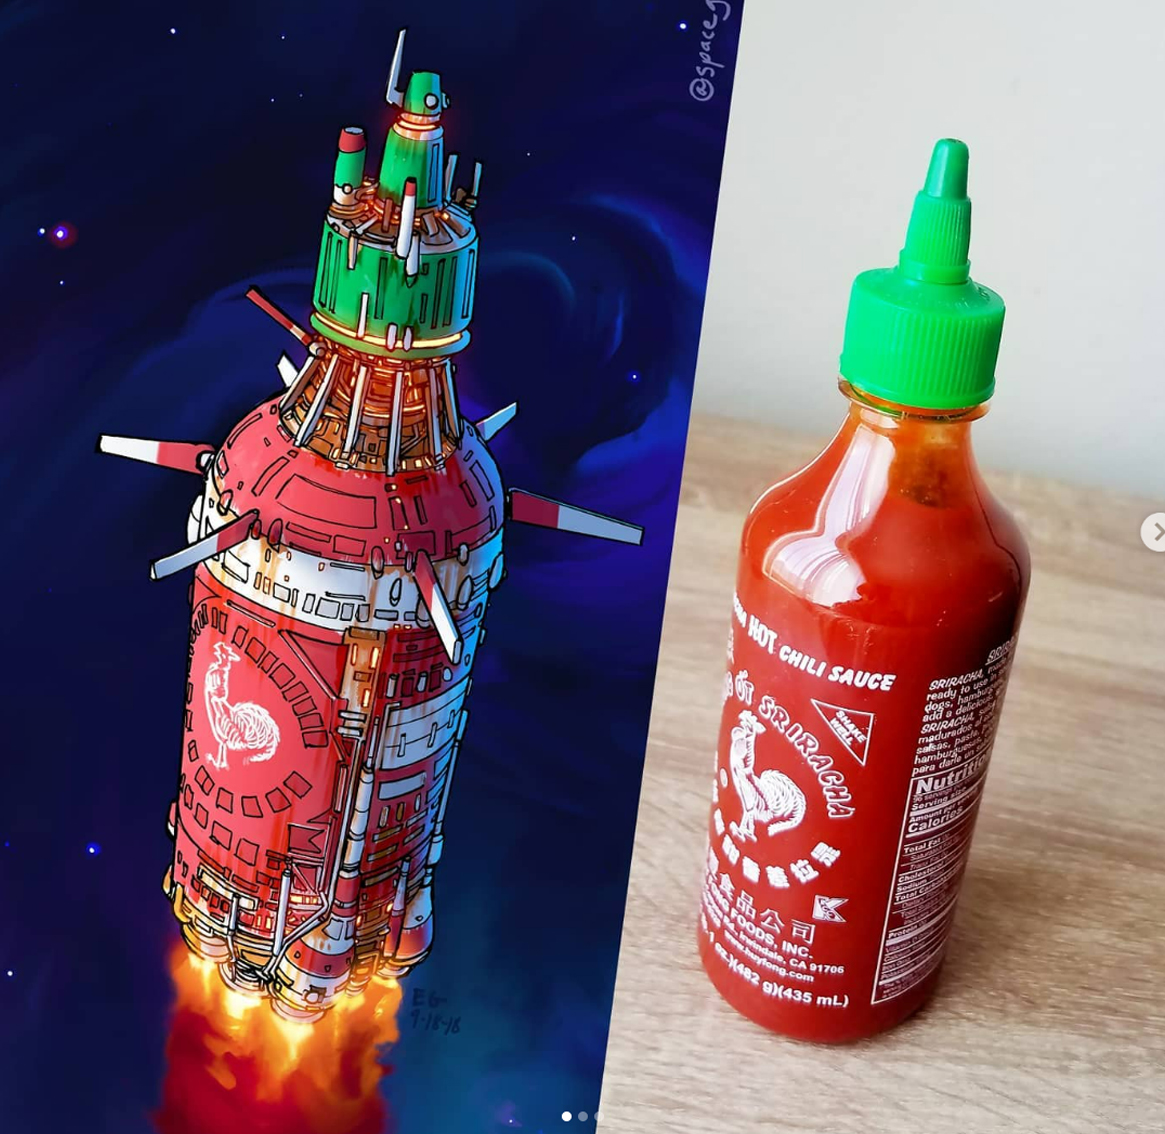 Artist Channels His Inner Space-Nerd and Transforms Regular Objects into Spaceships